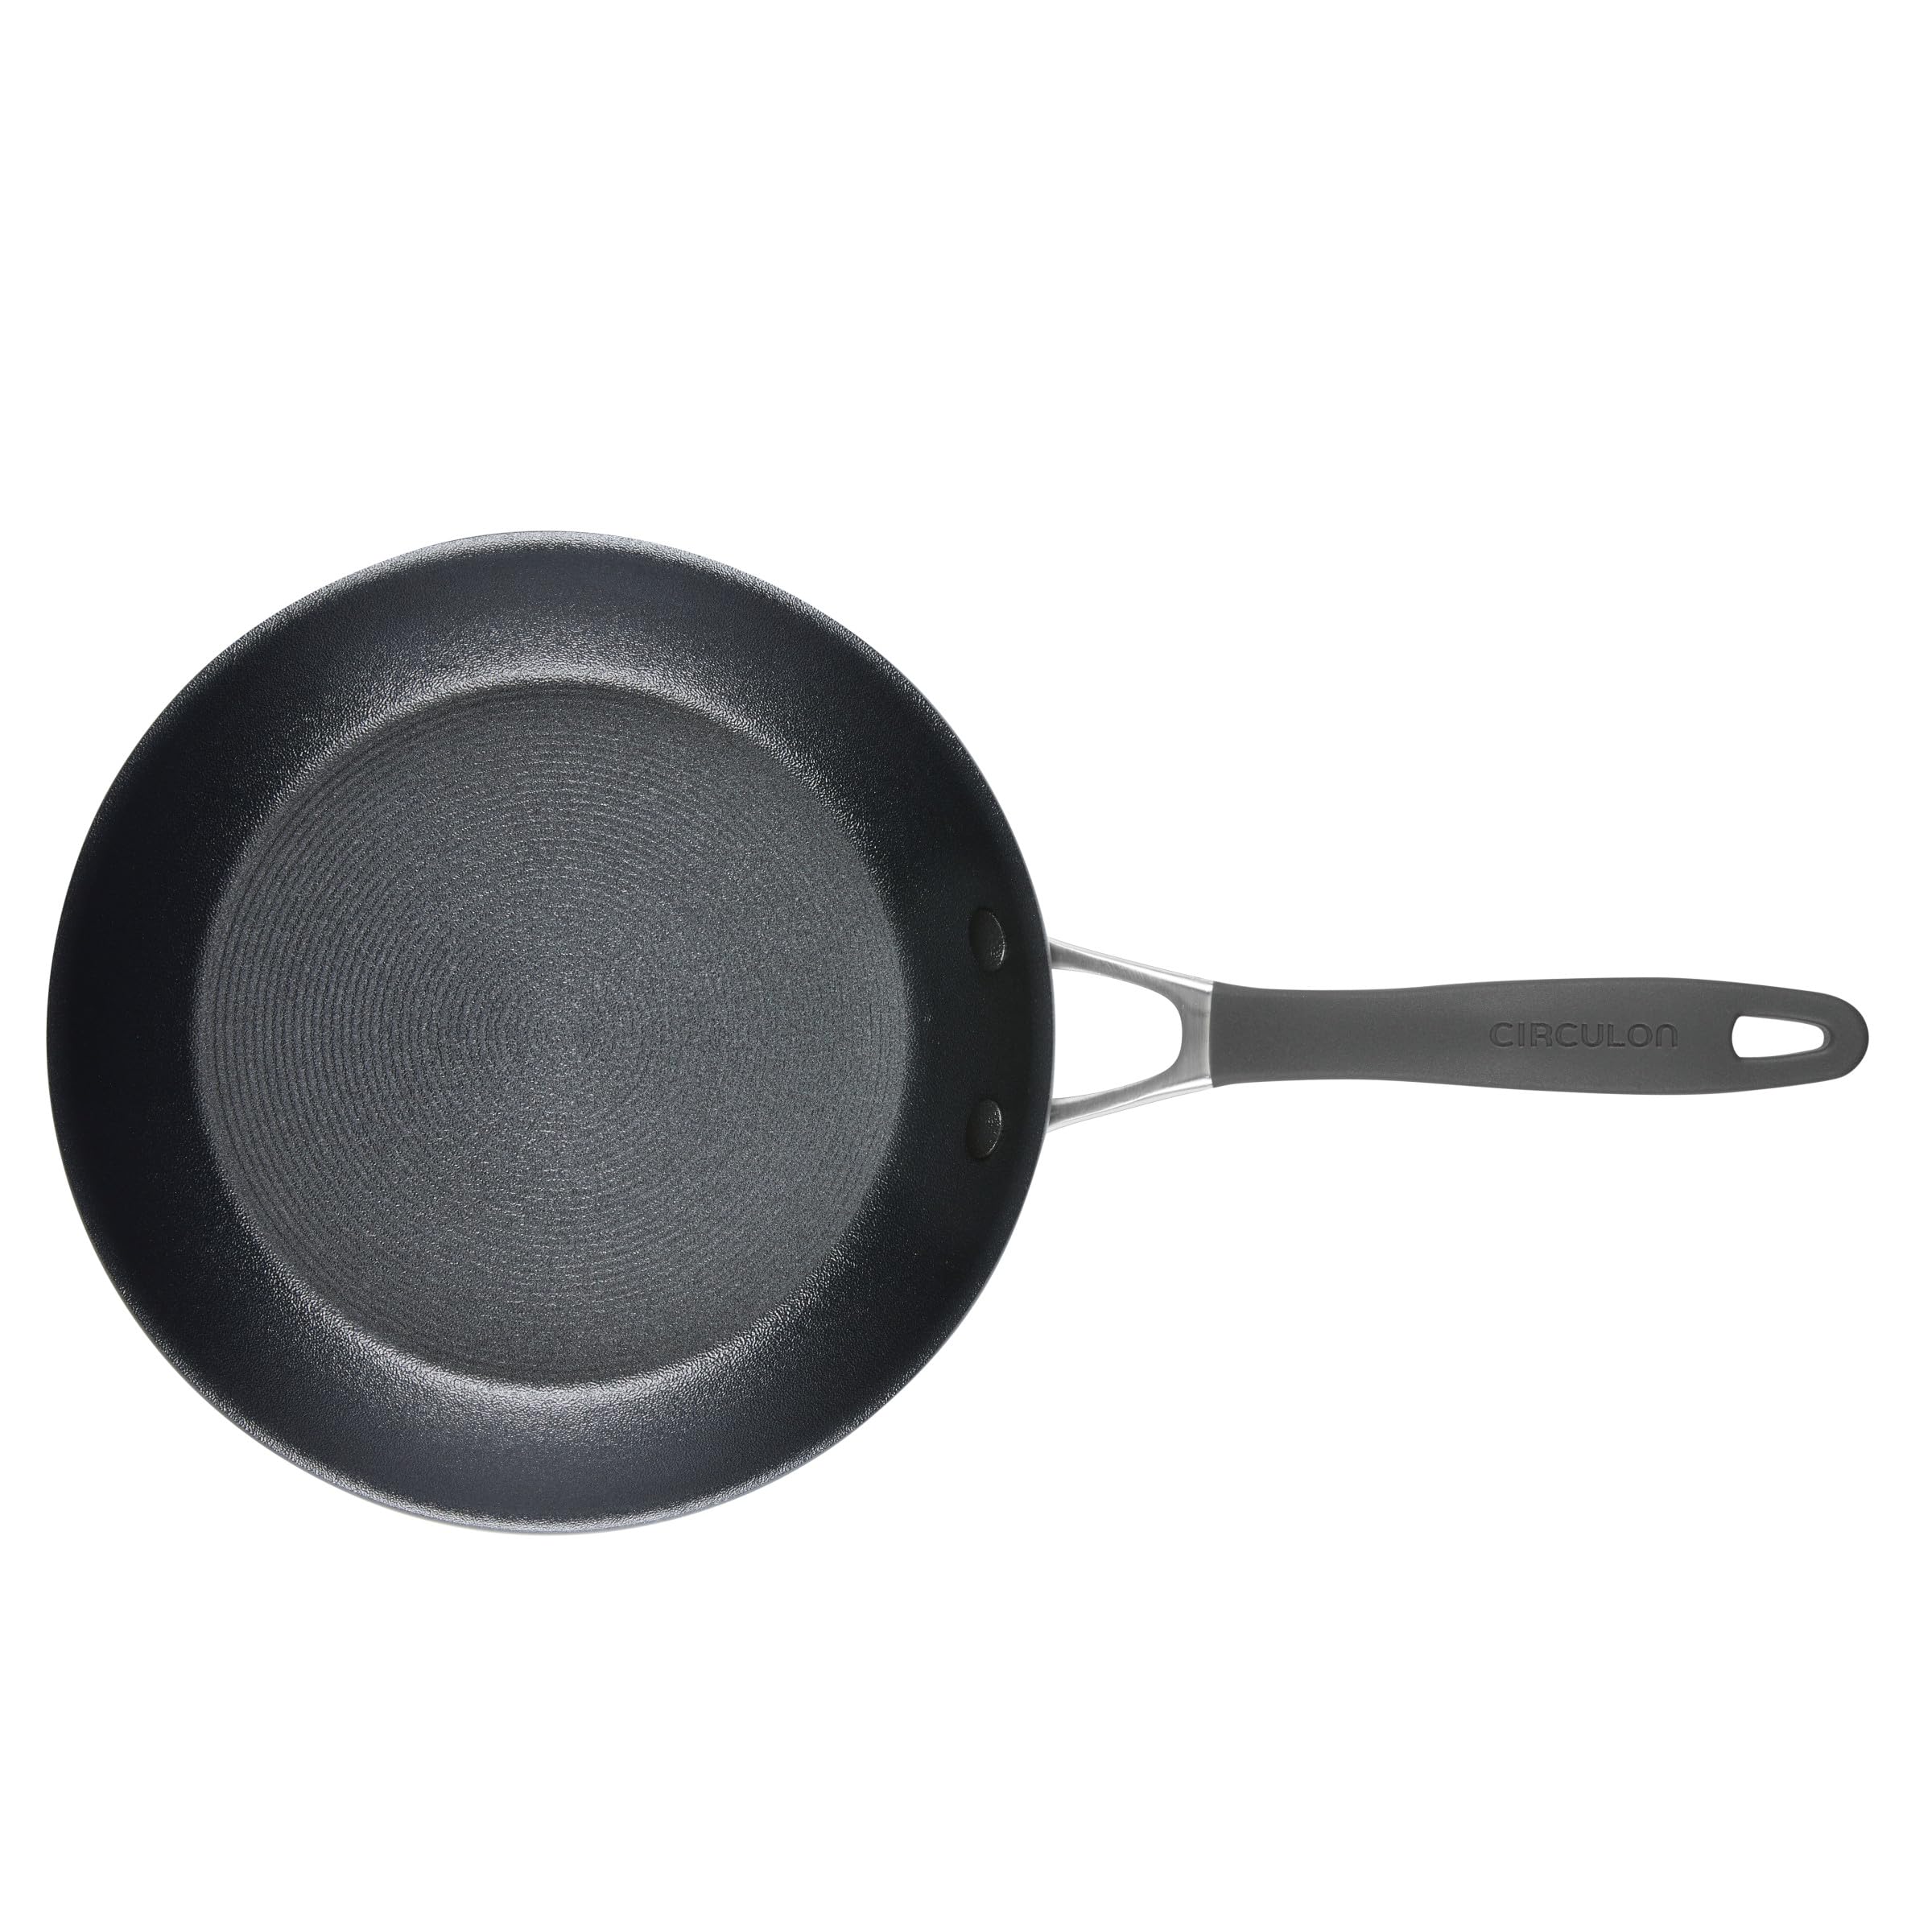 Circulon A1 Series with ScratchDefense Technology Nonstick Induction Frying Pans/Skillet Set, 8.5 Inch and 10 Inch - Graphite